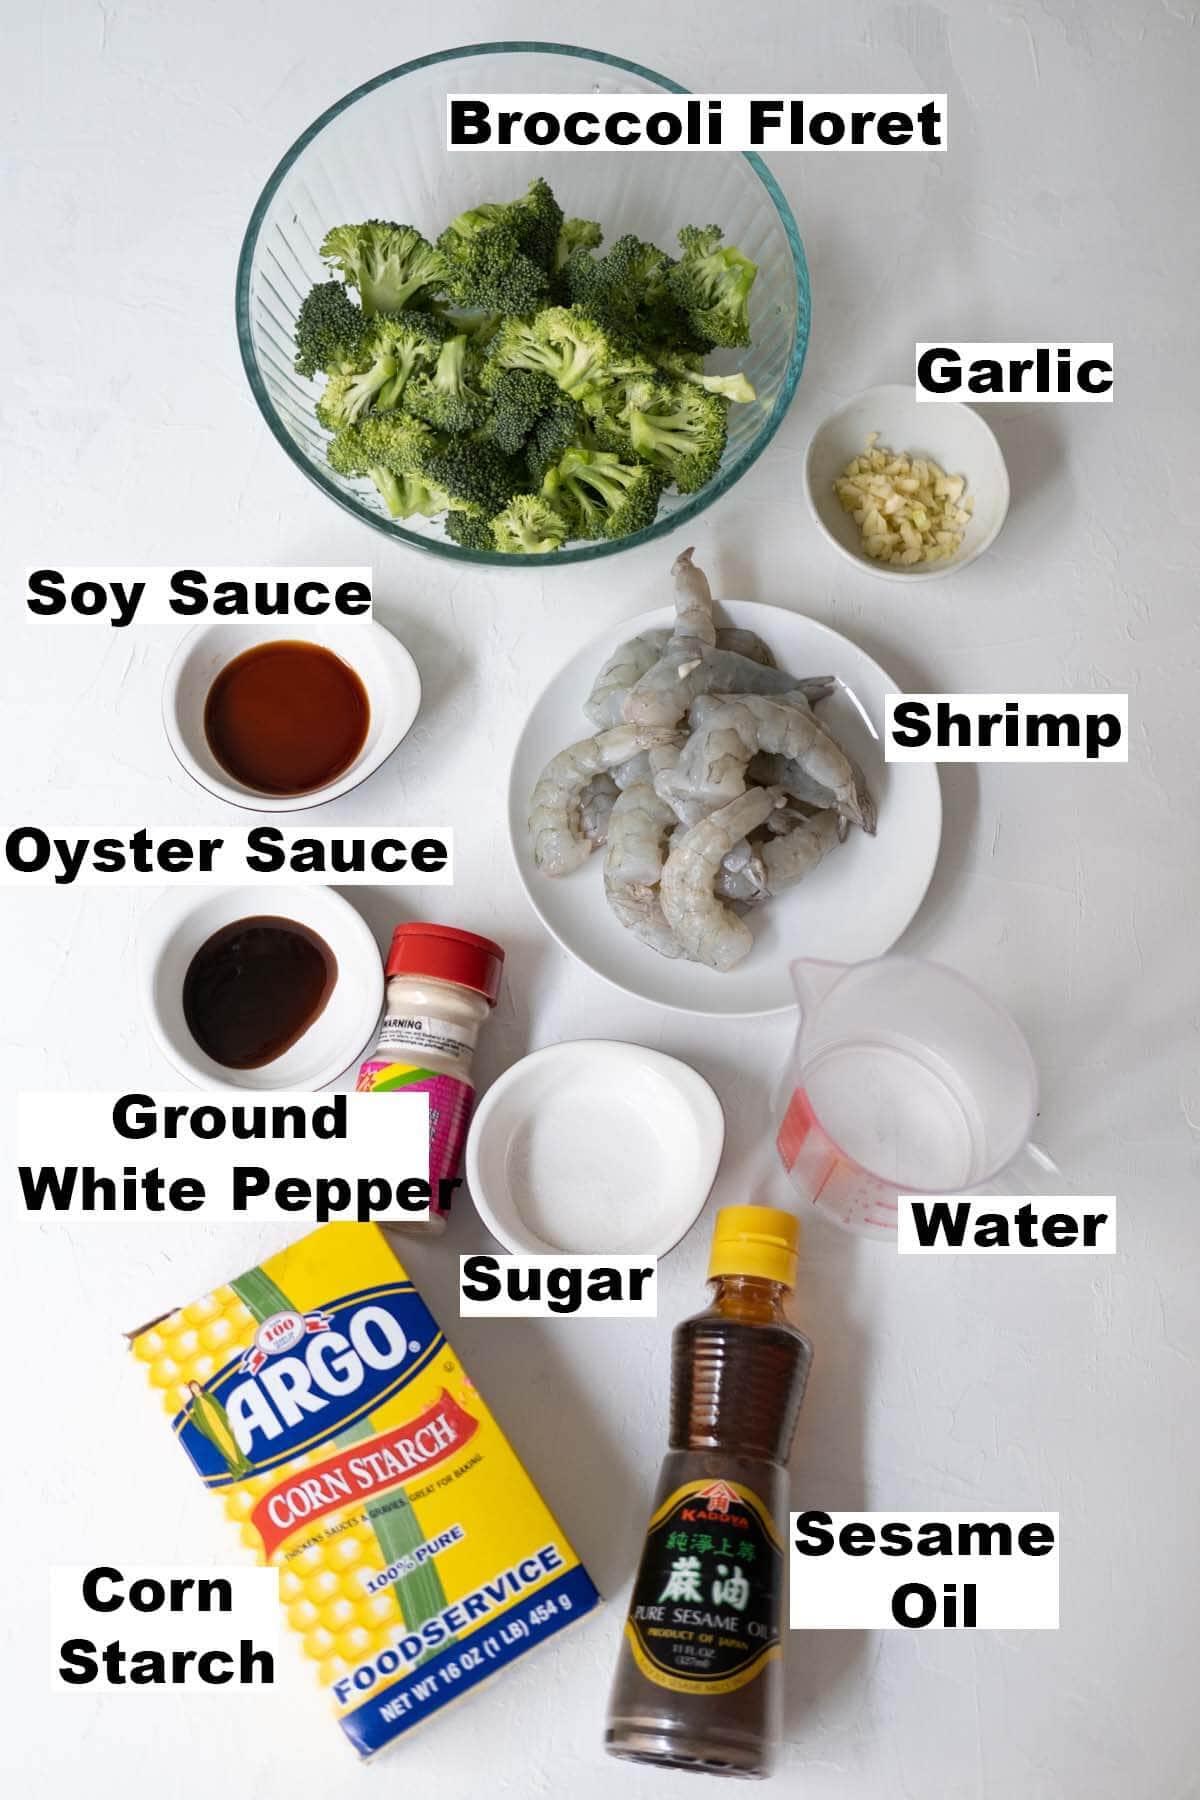 Ingredients for eleven shrimp and broccoli recipe. 